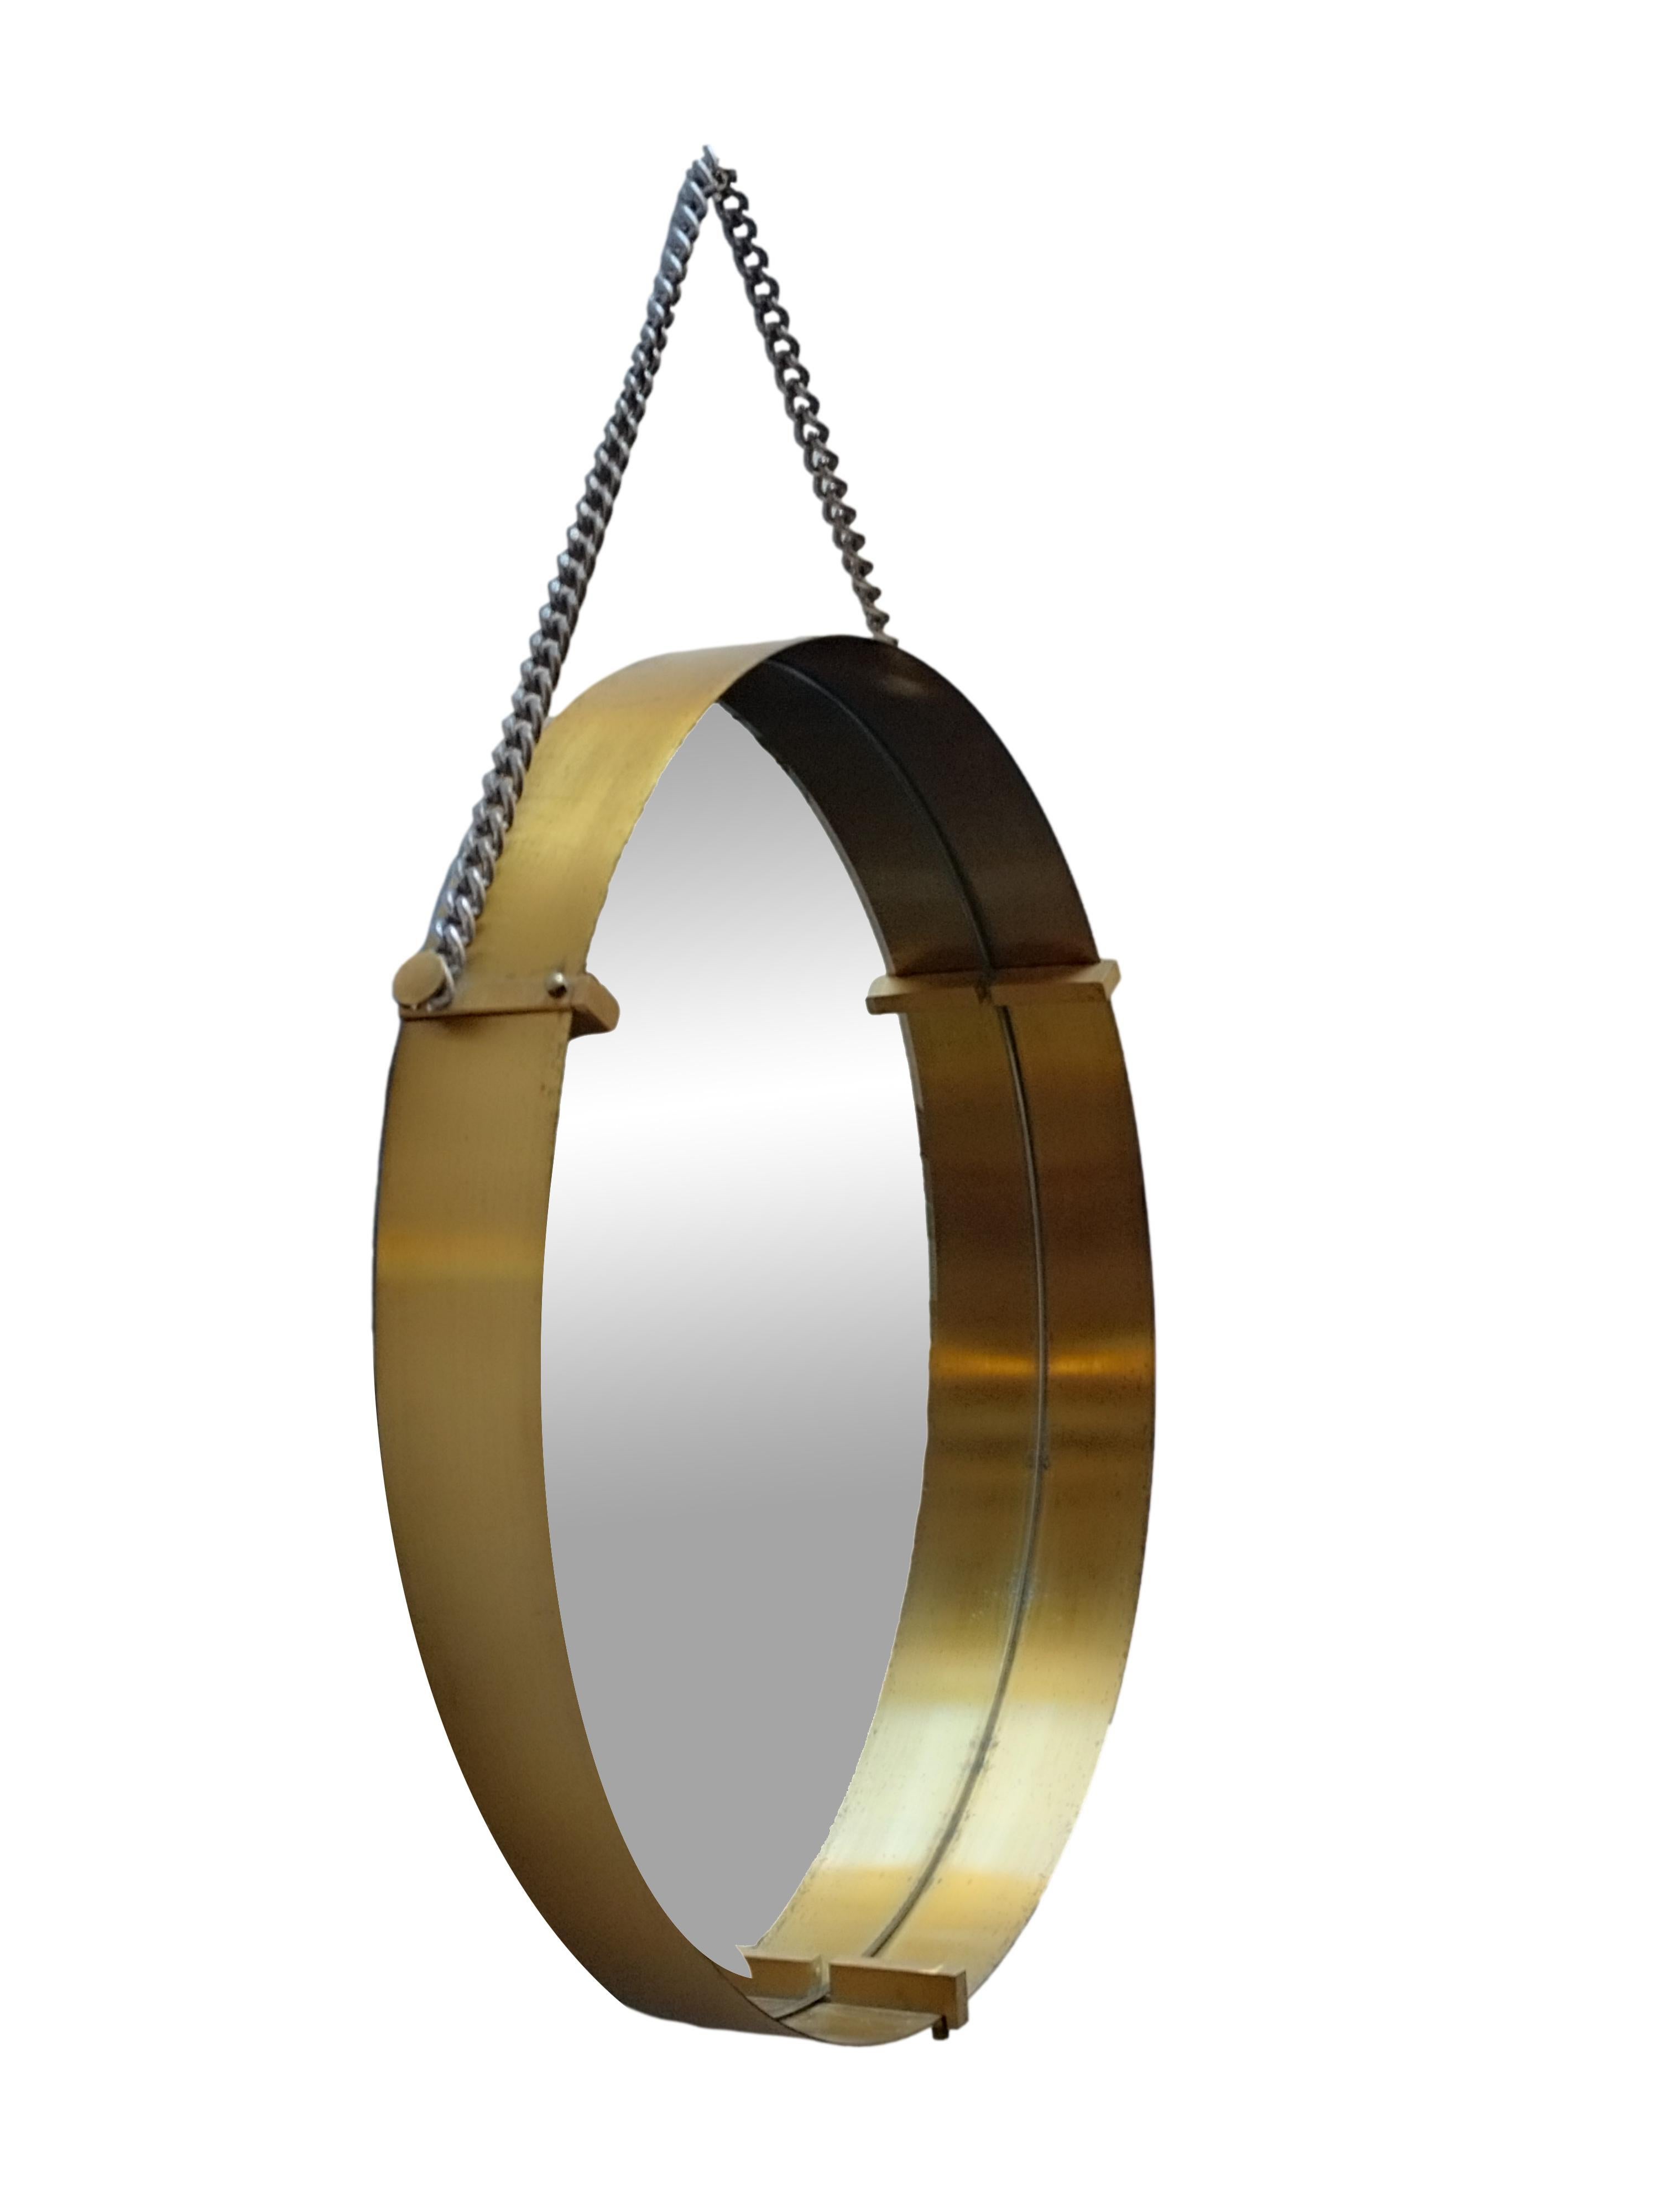 Wall mirror by Santambrogio & De Berti, 1960s Italian design,
The mirror has solid brass details and is supported by a chain.